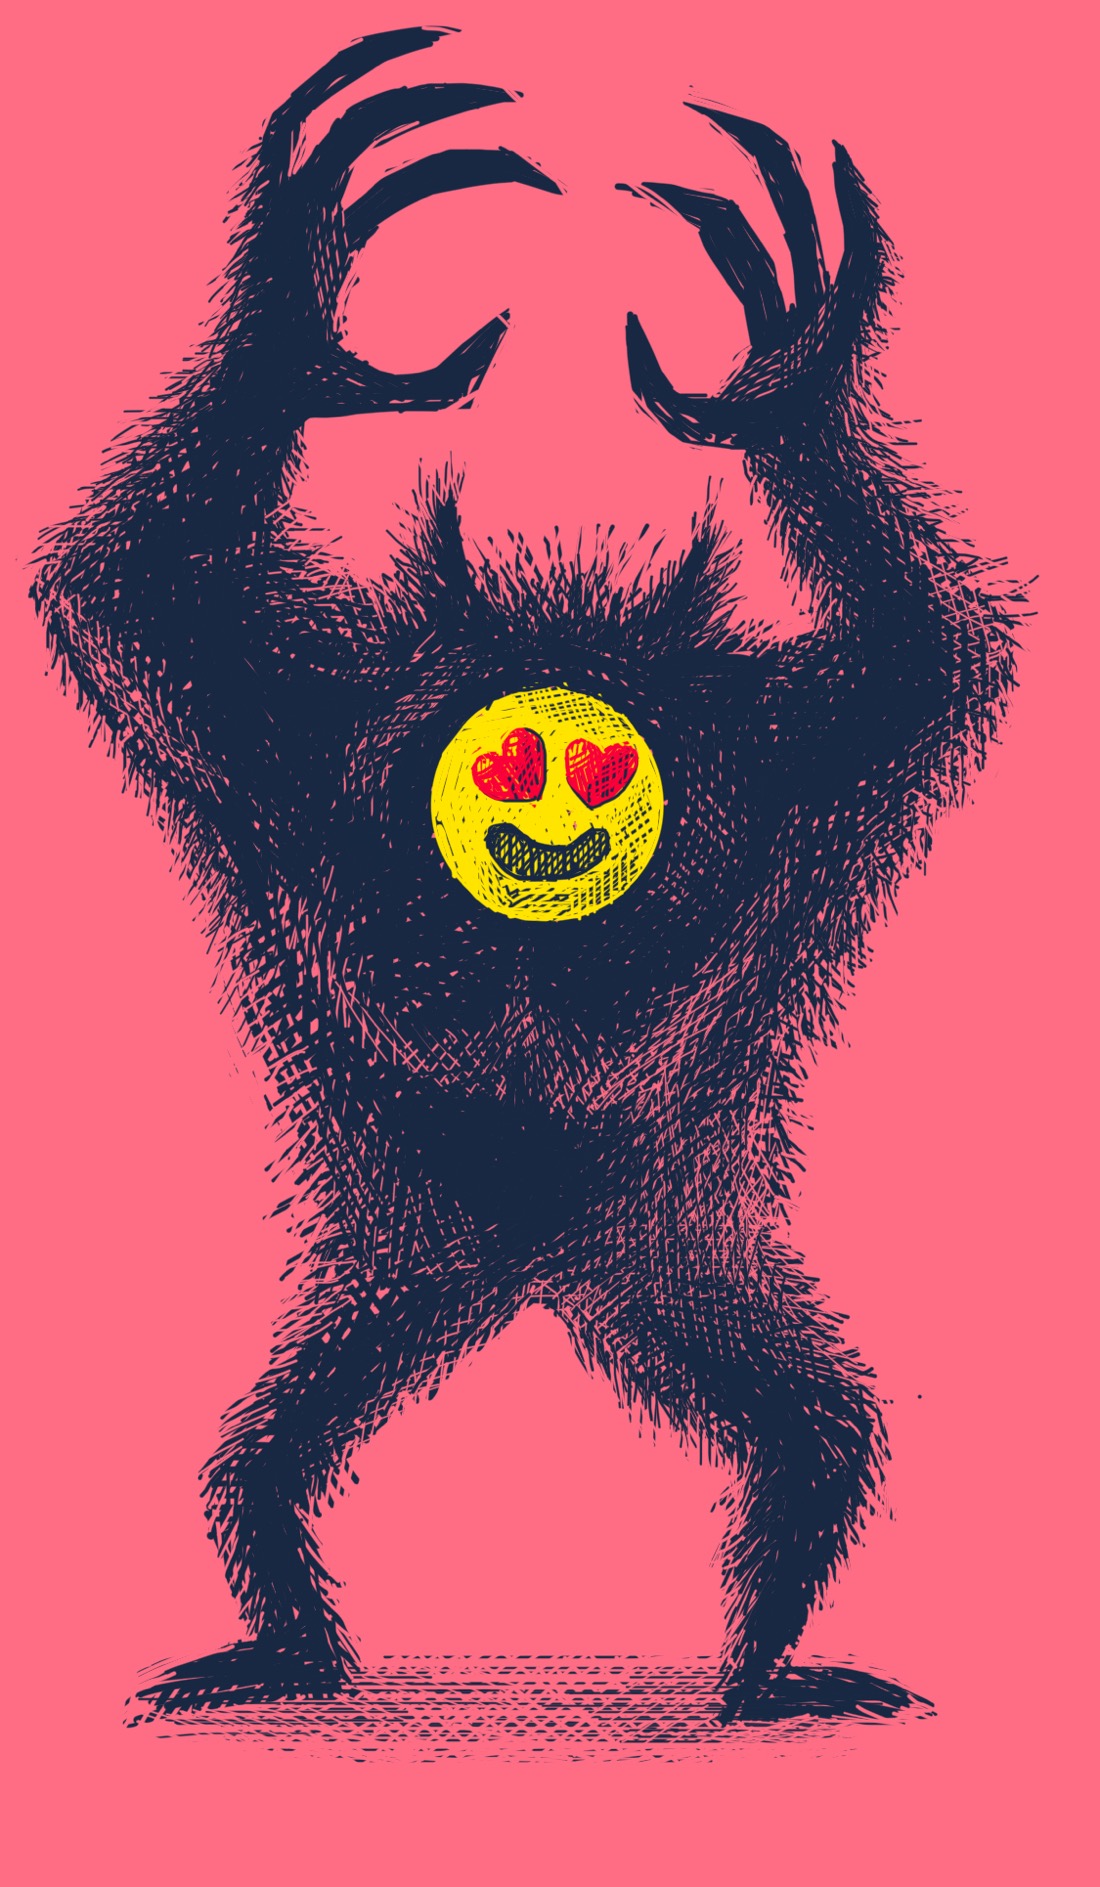 A giant werewolf-like monster stands in two legs, raising its arms over its head. Its hands are huge and clawed. In place of a face is a smiling emoji with eyes for hearts.